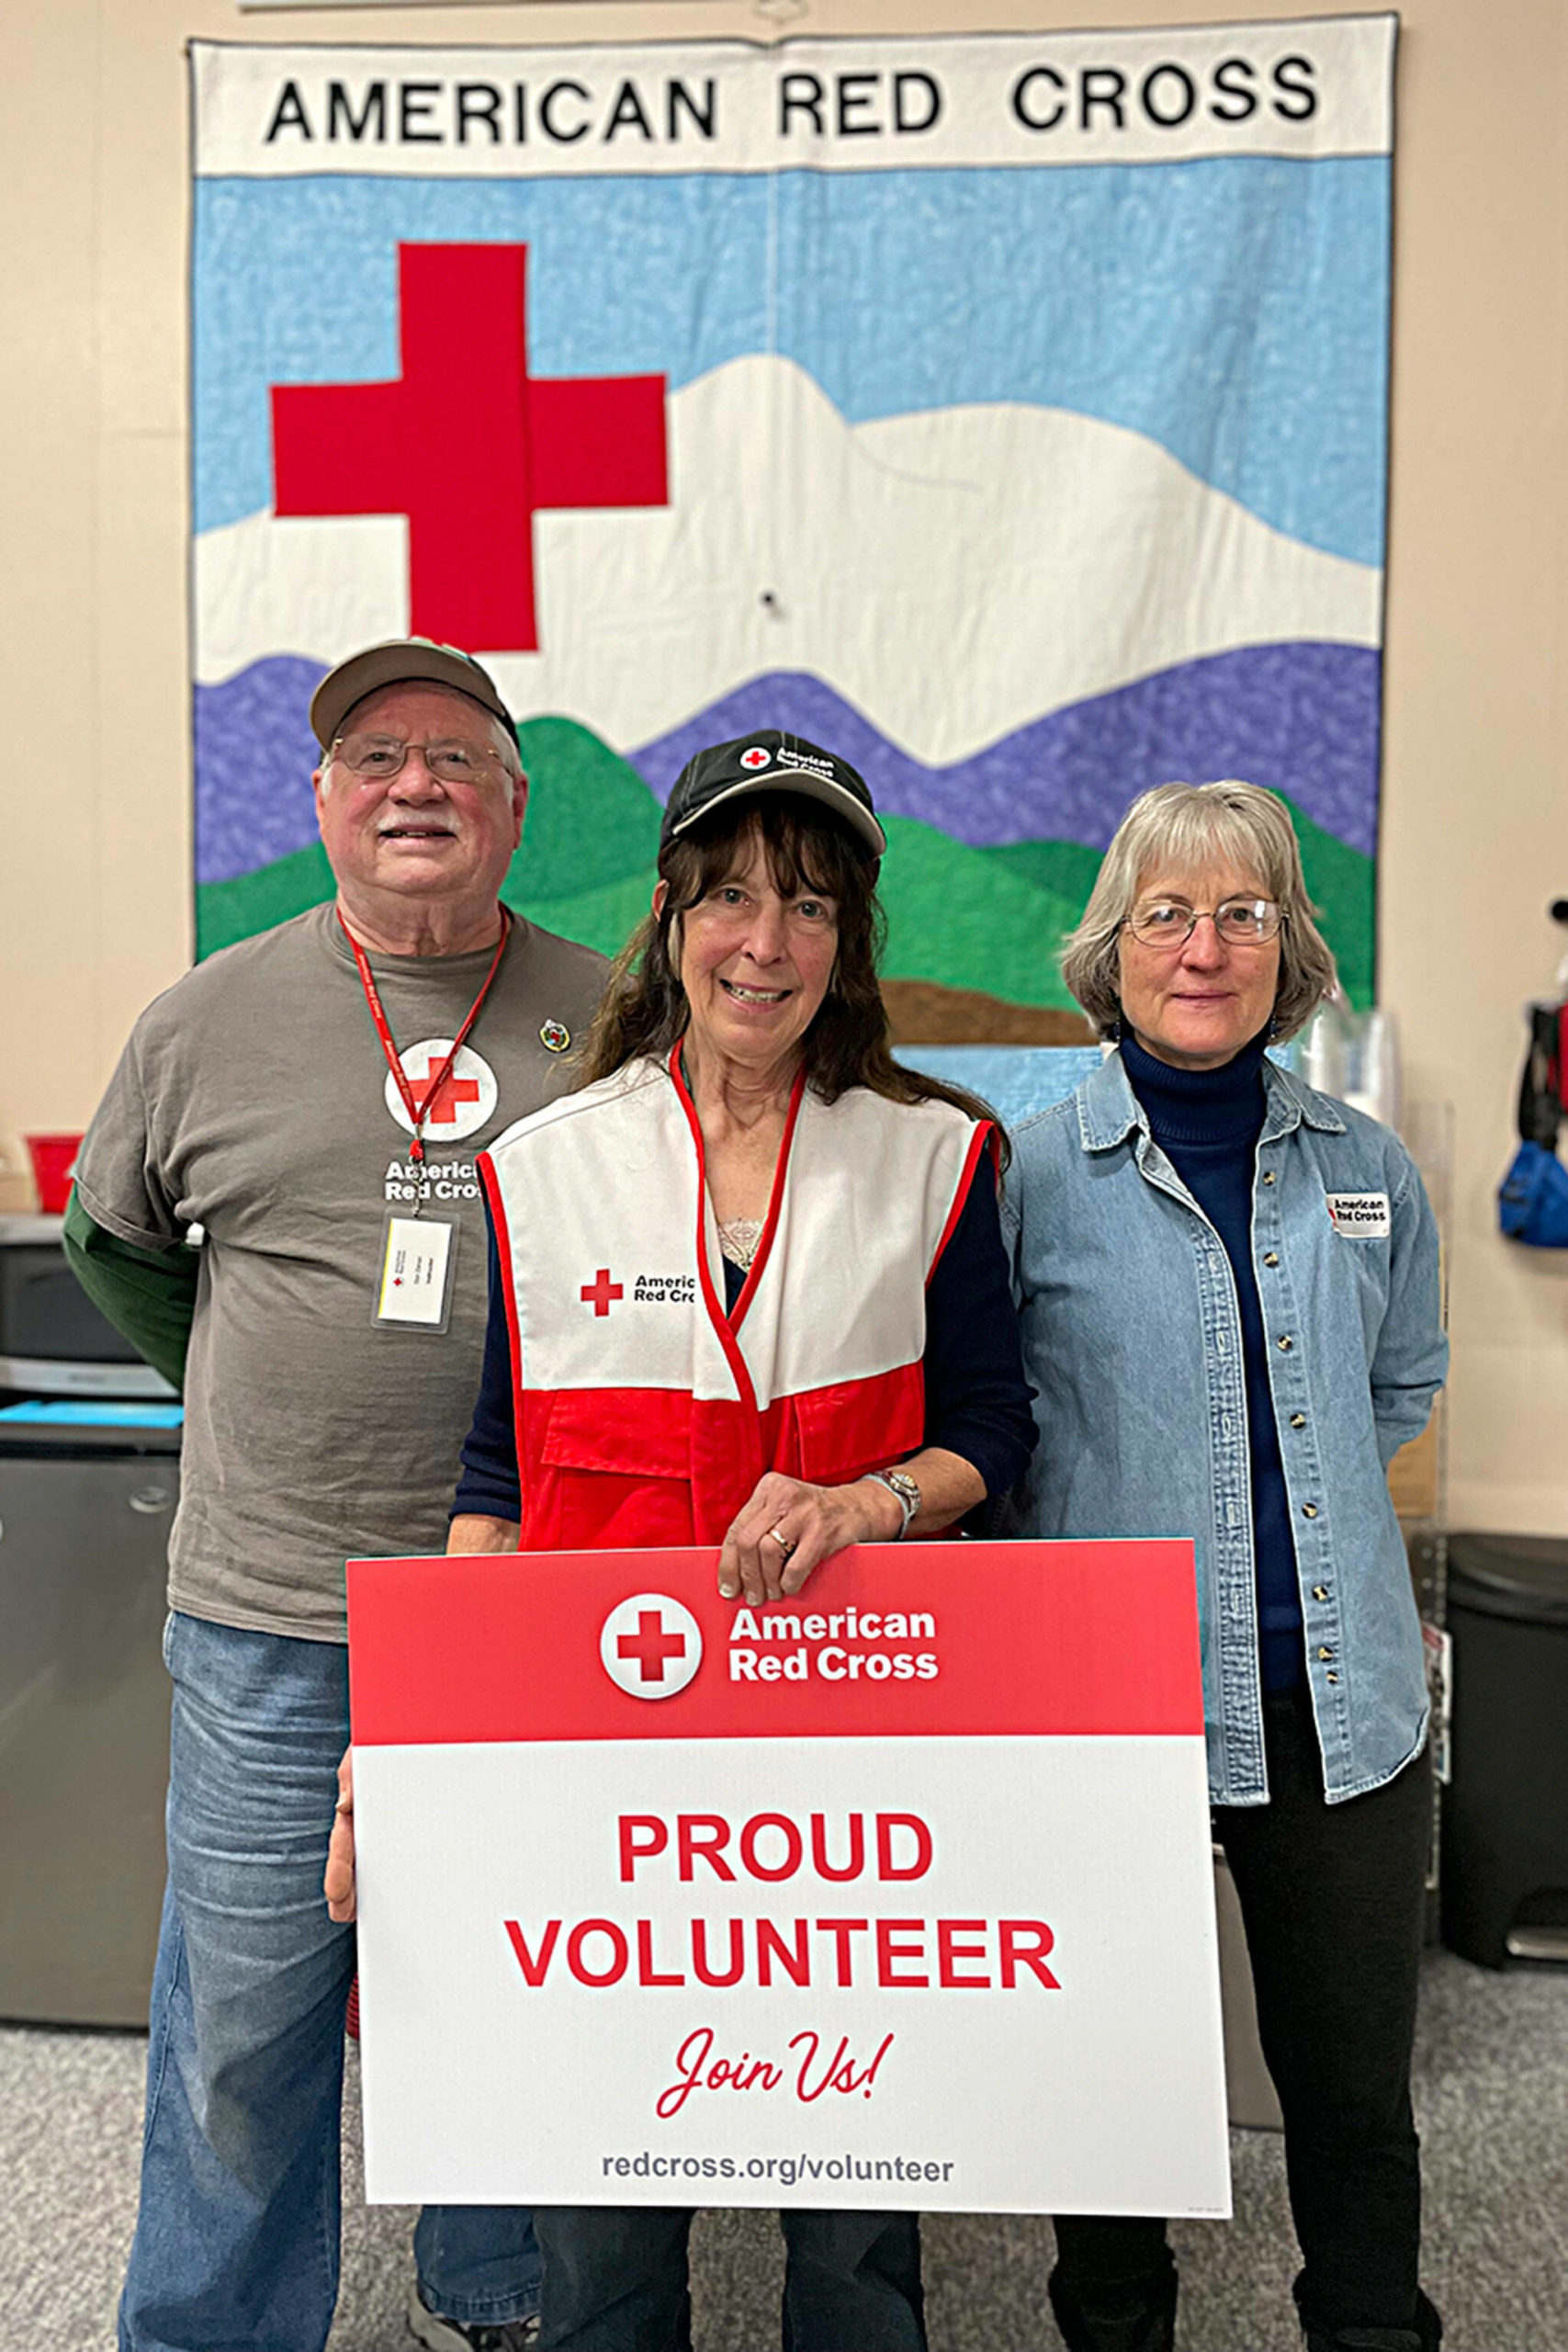 Red Cross volunteers based out of the Carlsborg office, from left, Don Zanon, Jean Pratschner, and Mary Ann Dangman say their volunteer numbers depleted during the COVID-19 pandemic, but they find there are many ways to reengage the volunteer group, including fire prevention, disaster preparation and connecting military families.